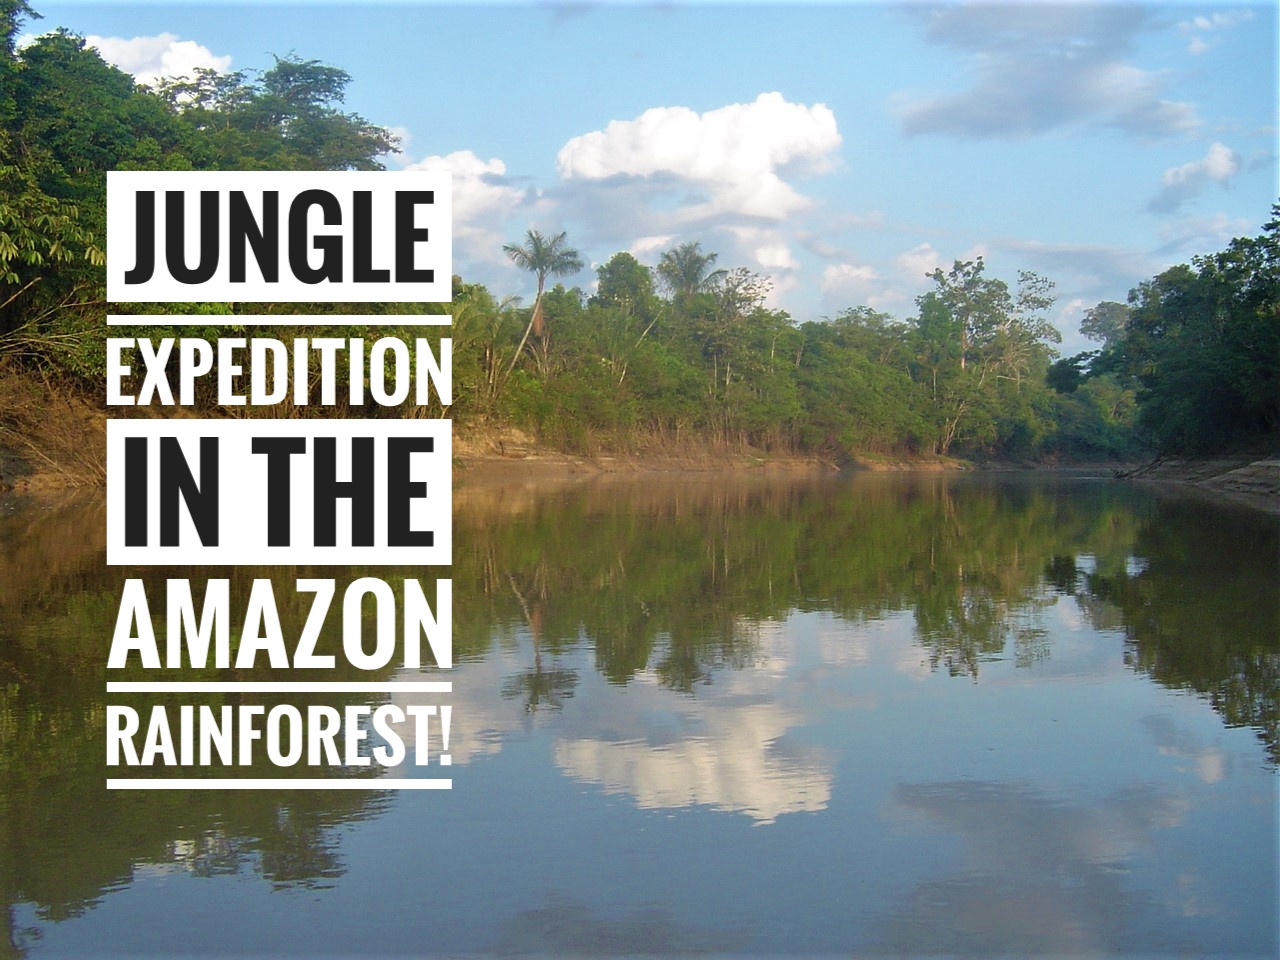 Jungle Expedition in the Amazon Rainforest!